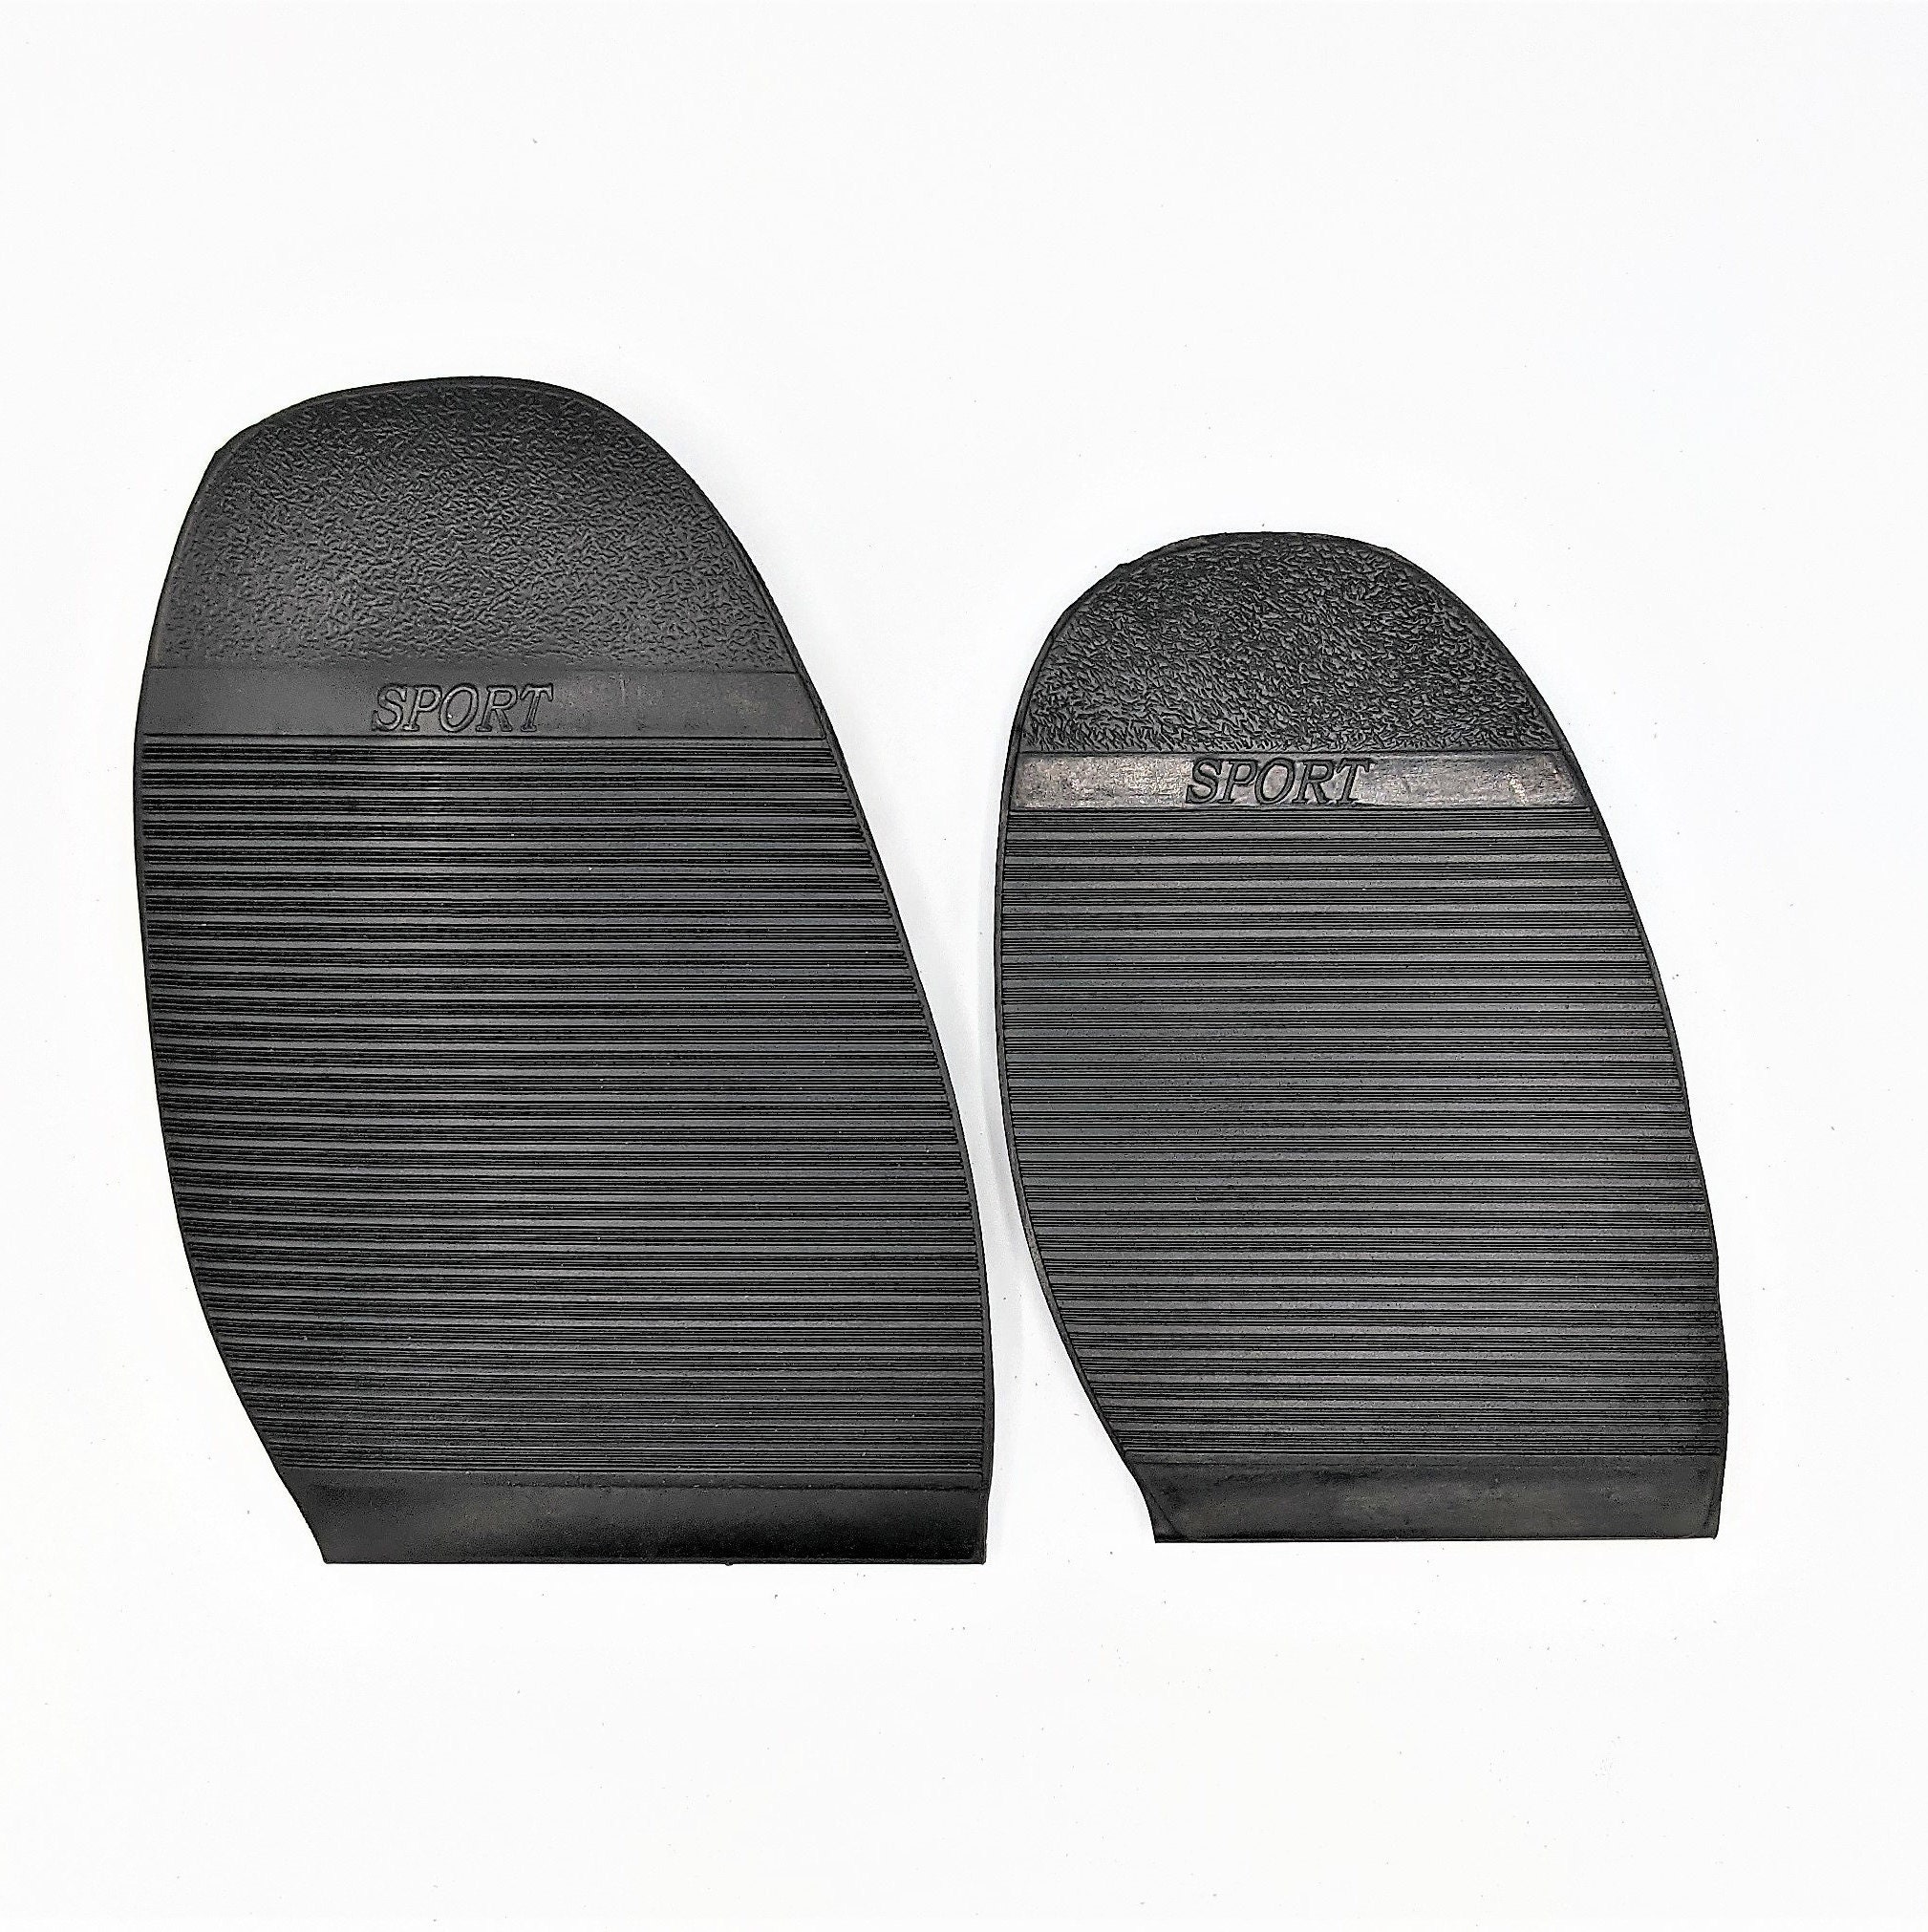  Solemates Sole Guard - Sole Sticker Crystal Clear 3M Sole  Guard and Sole Protector for Christian Louboutin, Jimmy Choo and Designer  Shoes